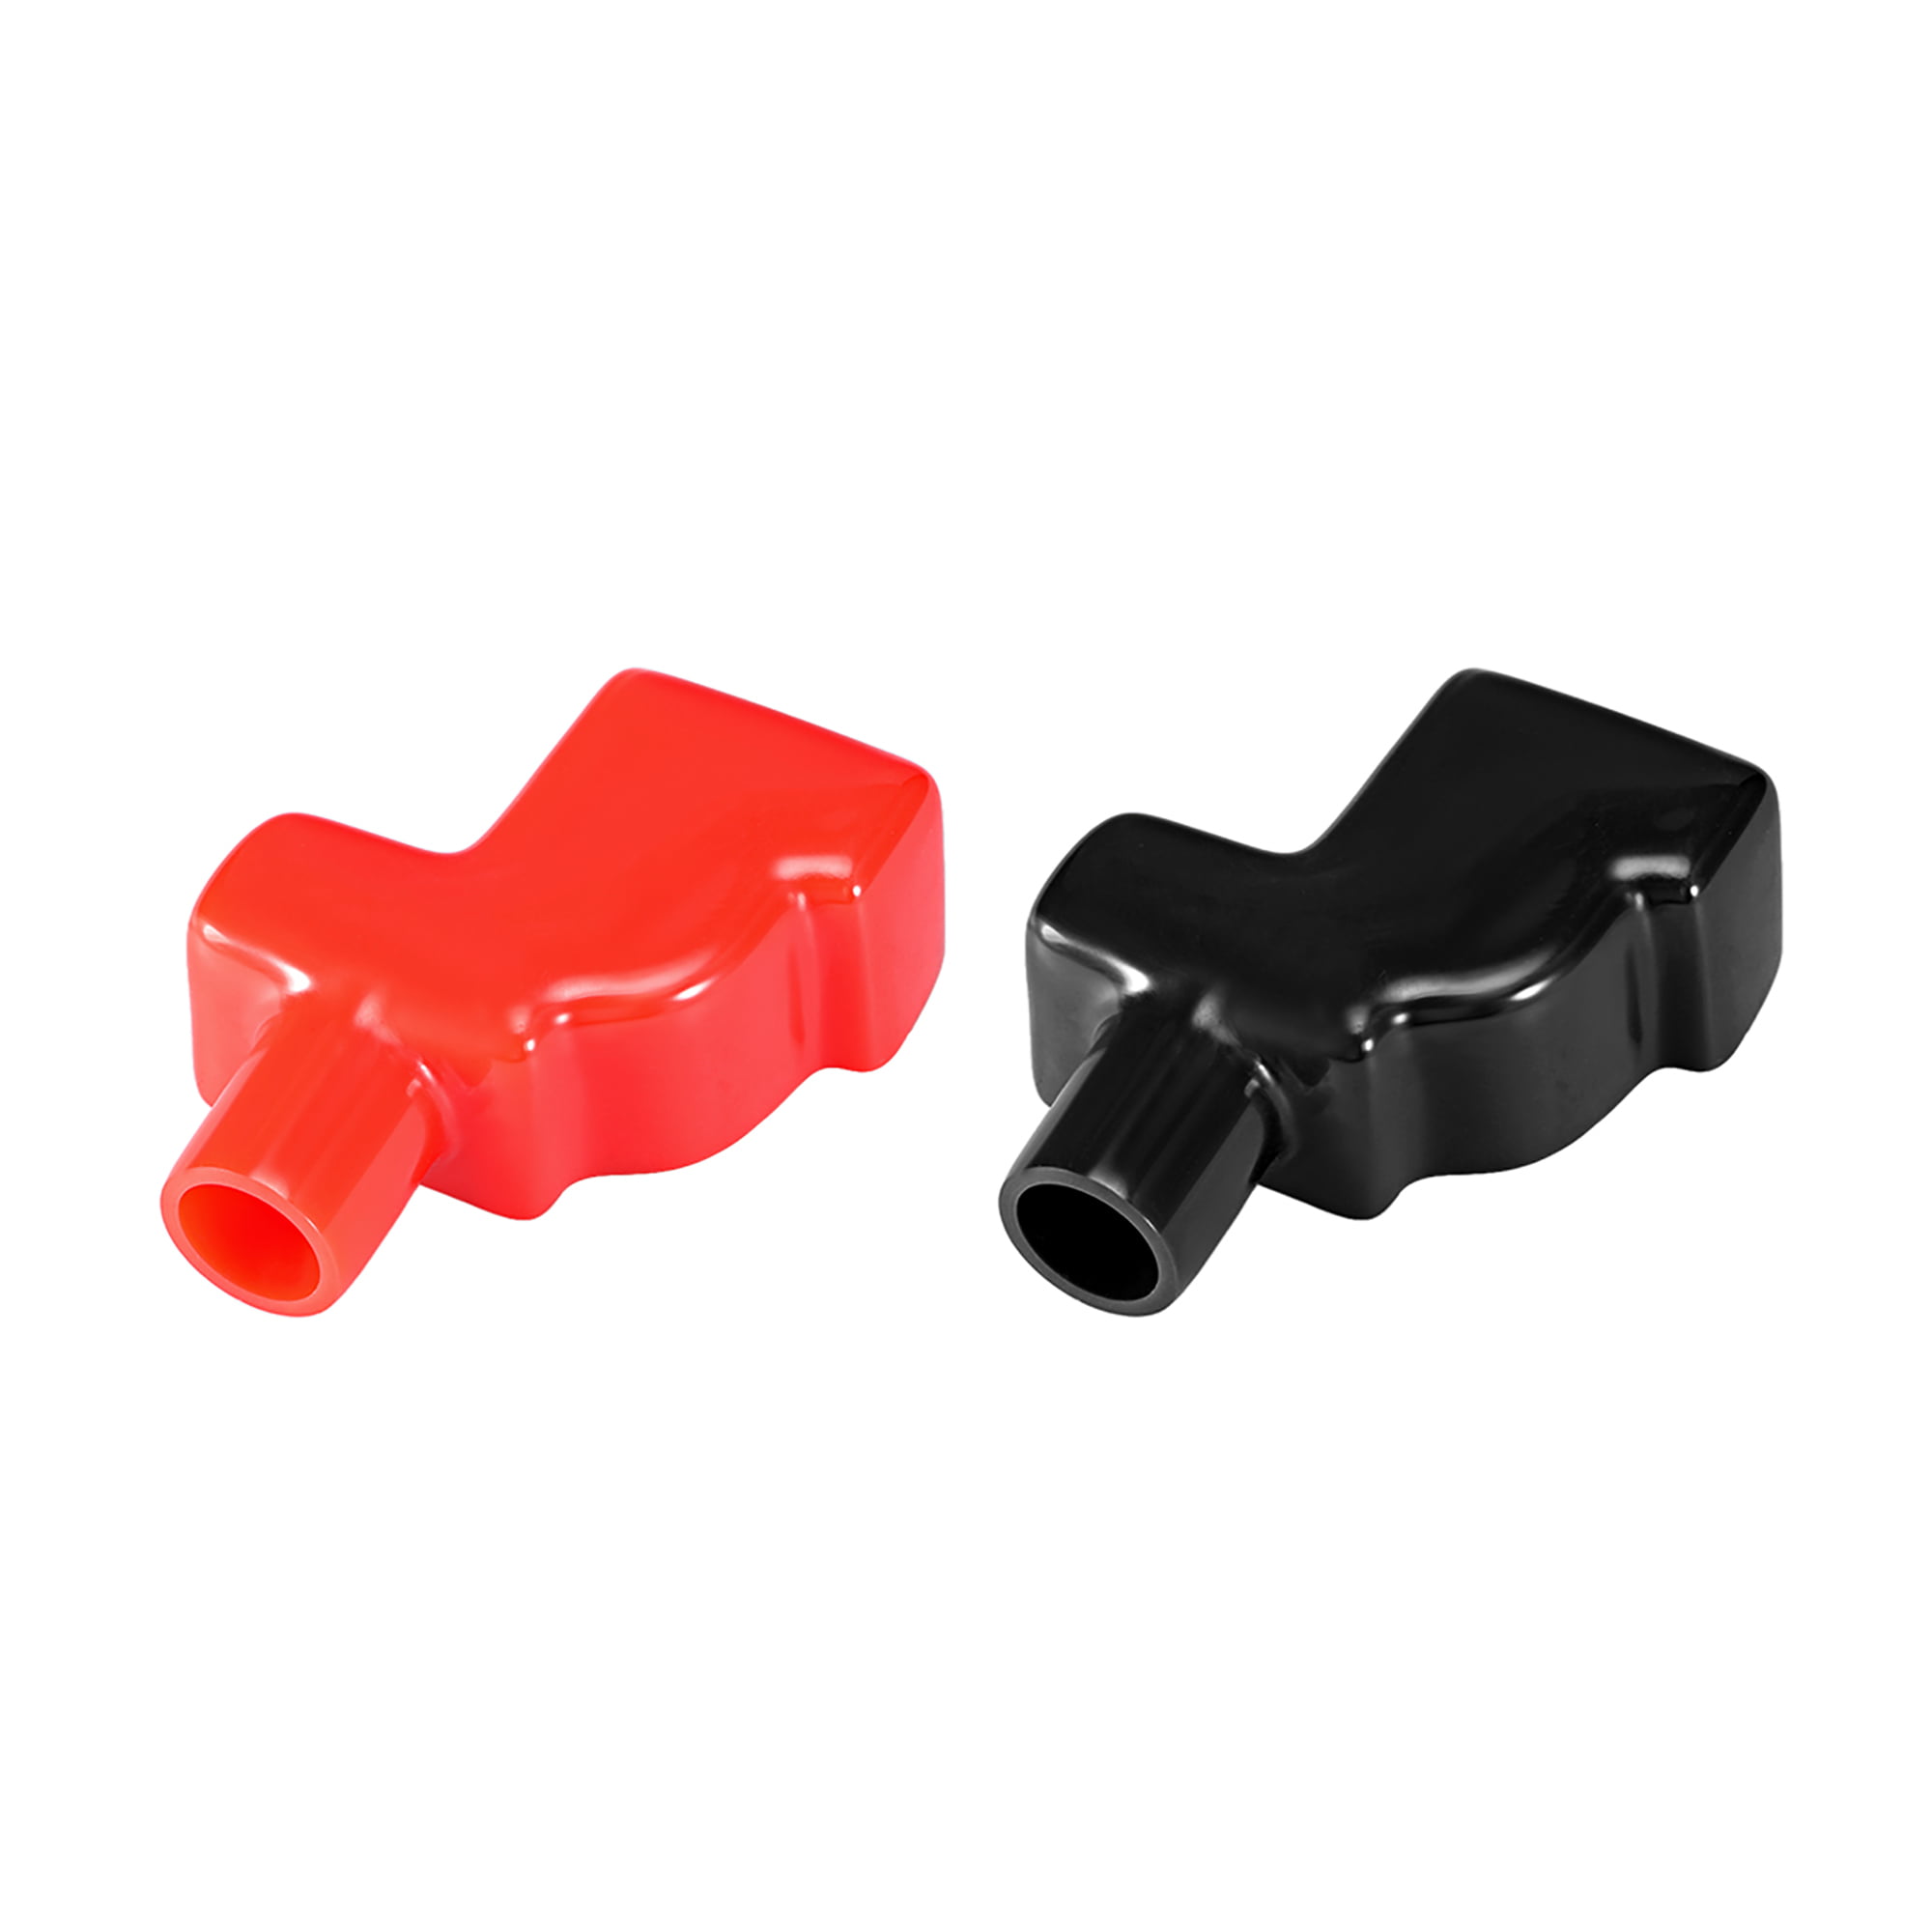 Flexible Battery Terminal Rubber Protector Cover for 14mm Cable Red Black 1 Pair 